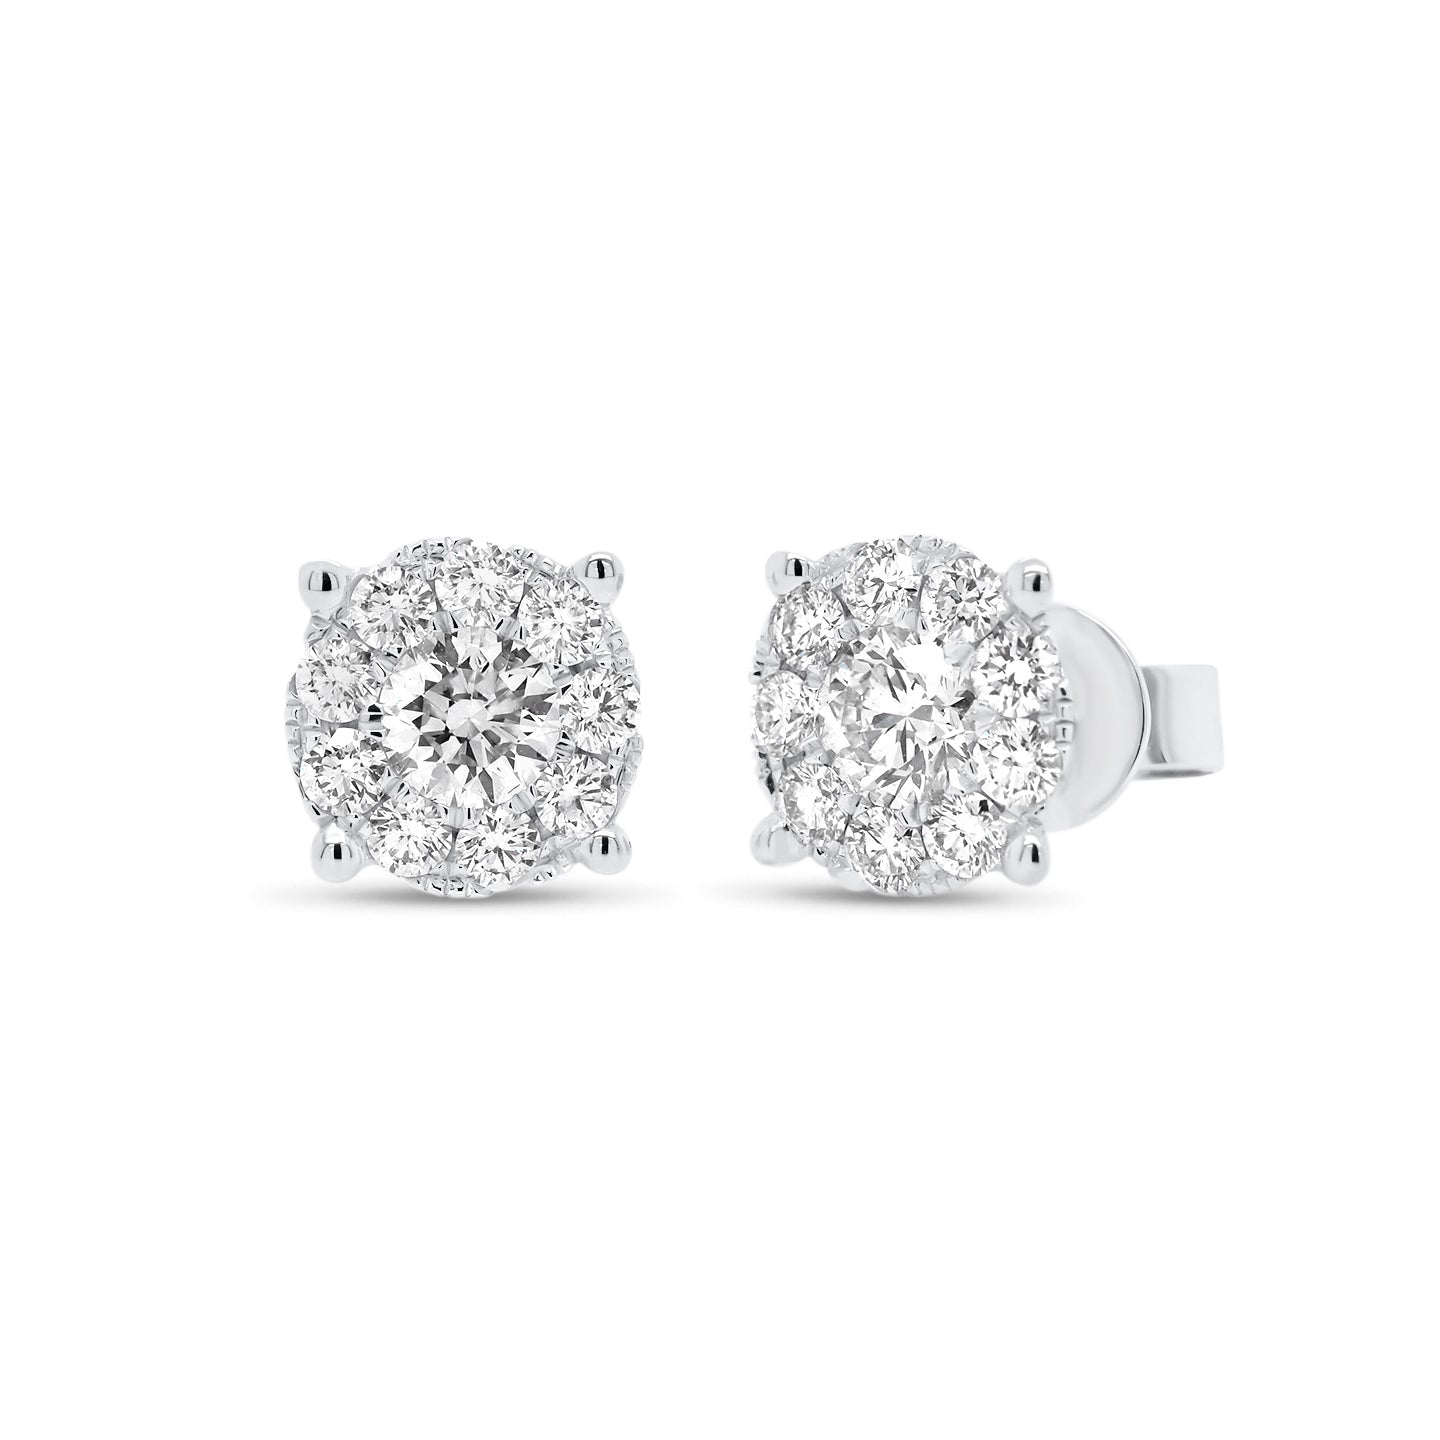 1.02 ct round diamond cluster earrings - 18K gold weighing 1.88 grams  - 2 round diamonds totaling 0.51 carats  - 18 round diamonds totaling 0.51 carats